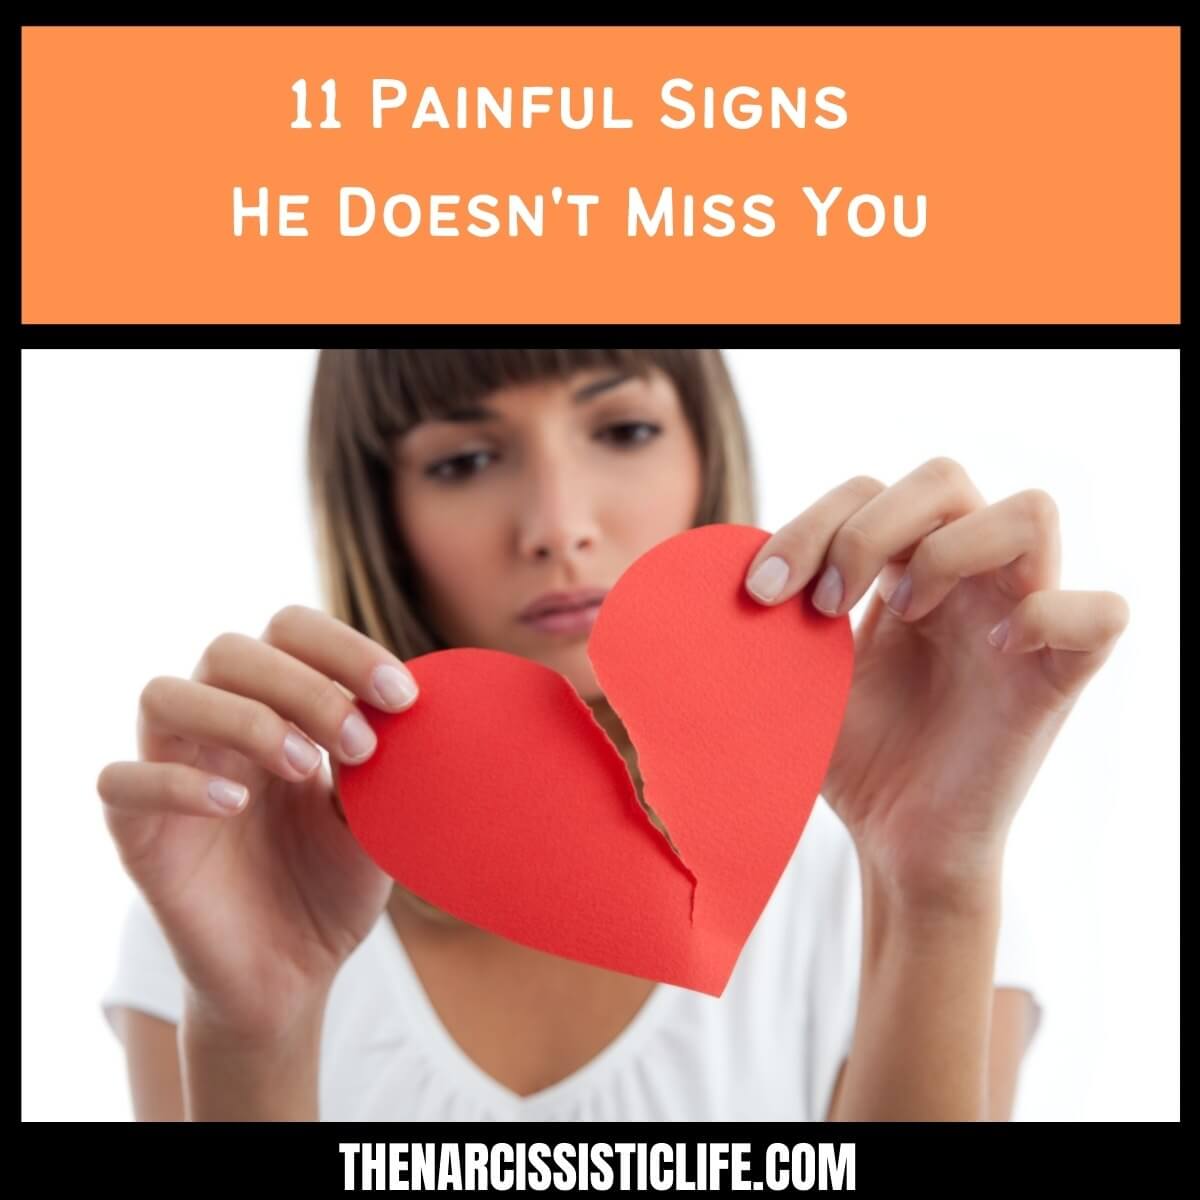 11 Painful Signs He Doesn't Miss You